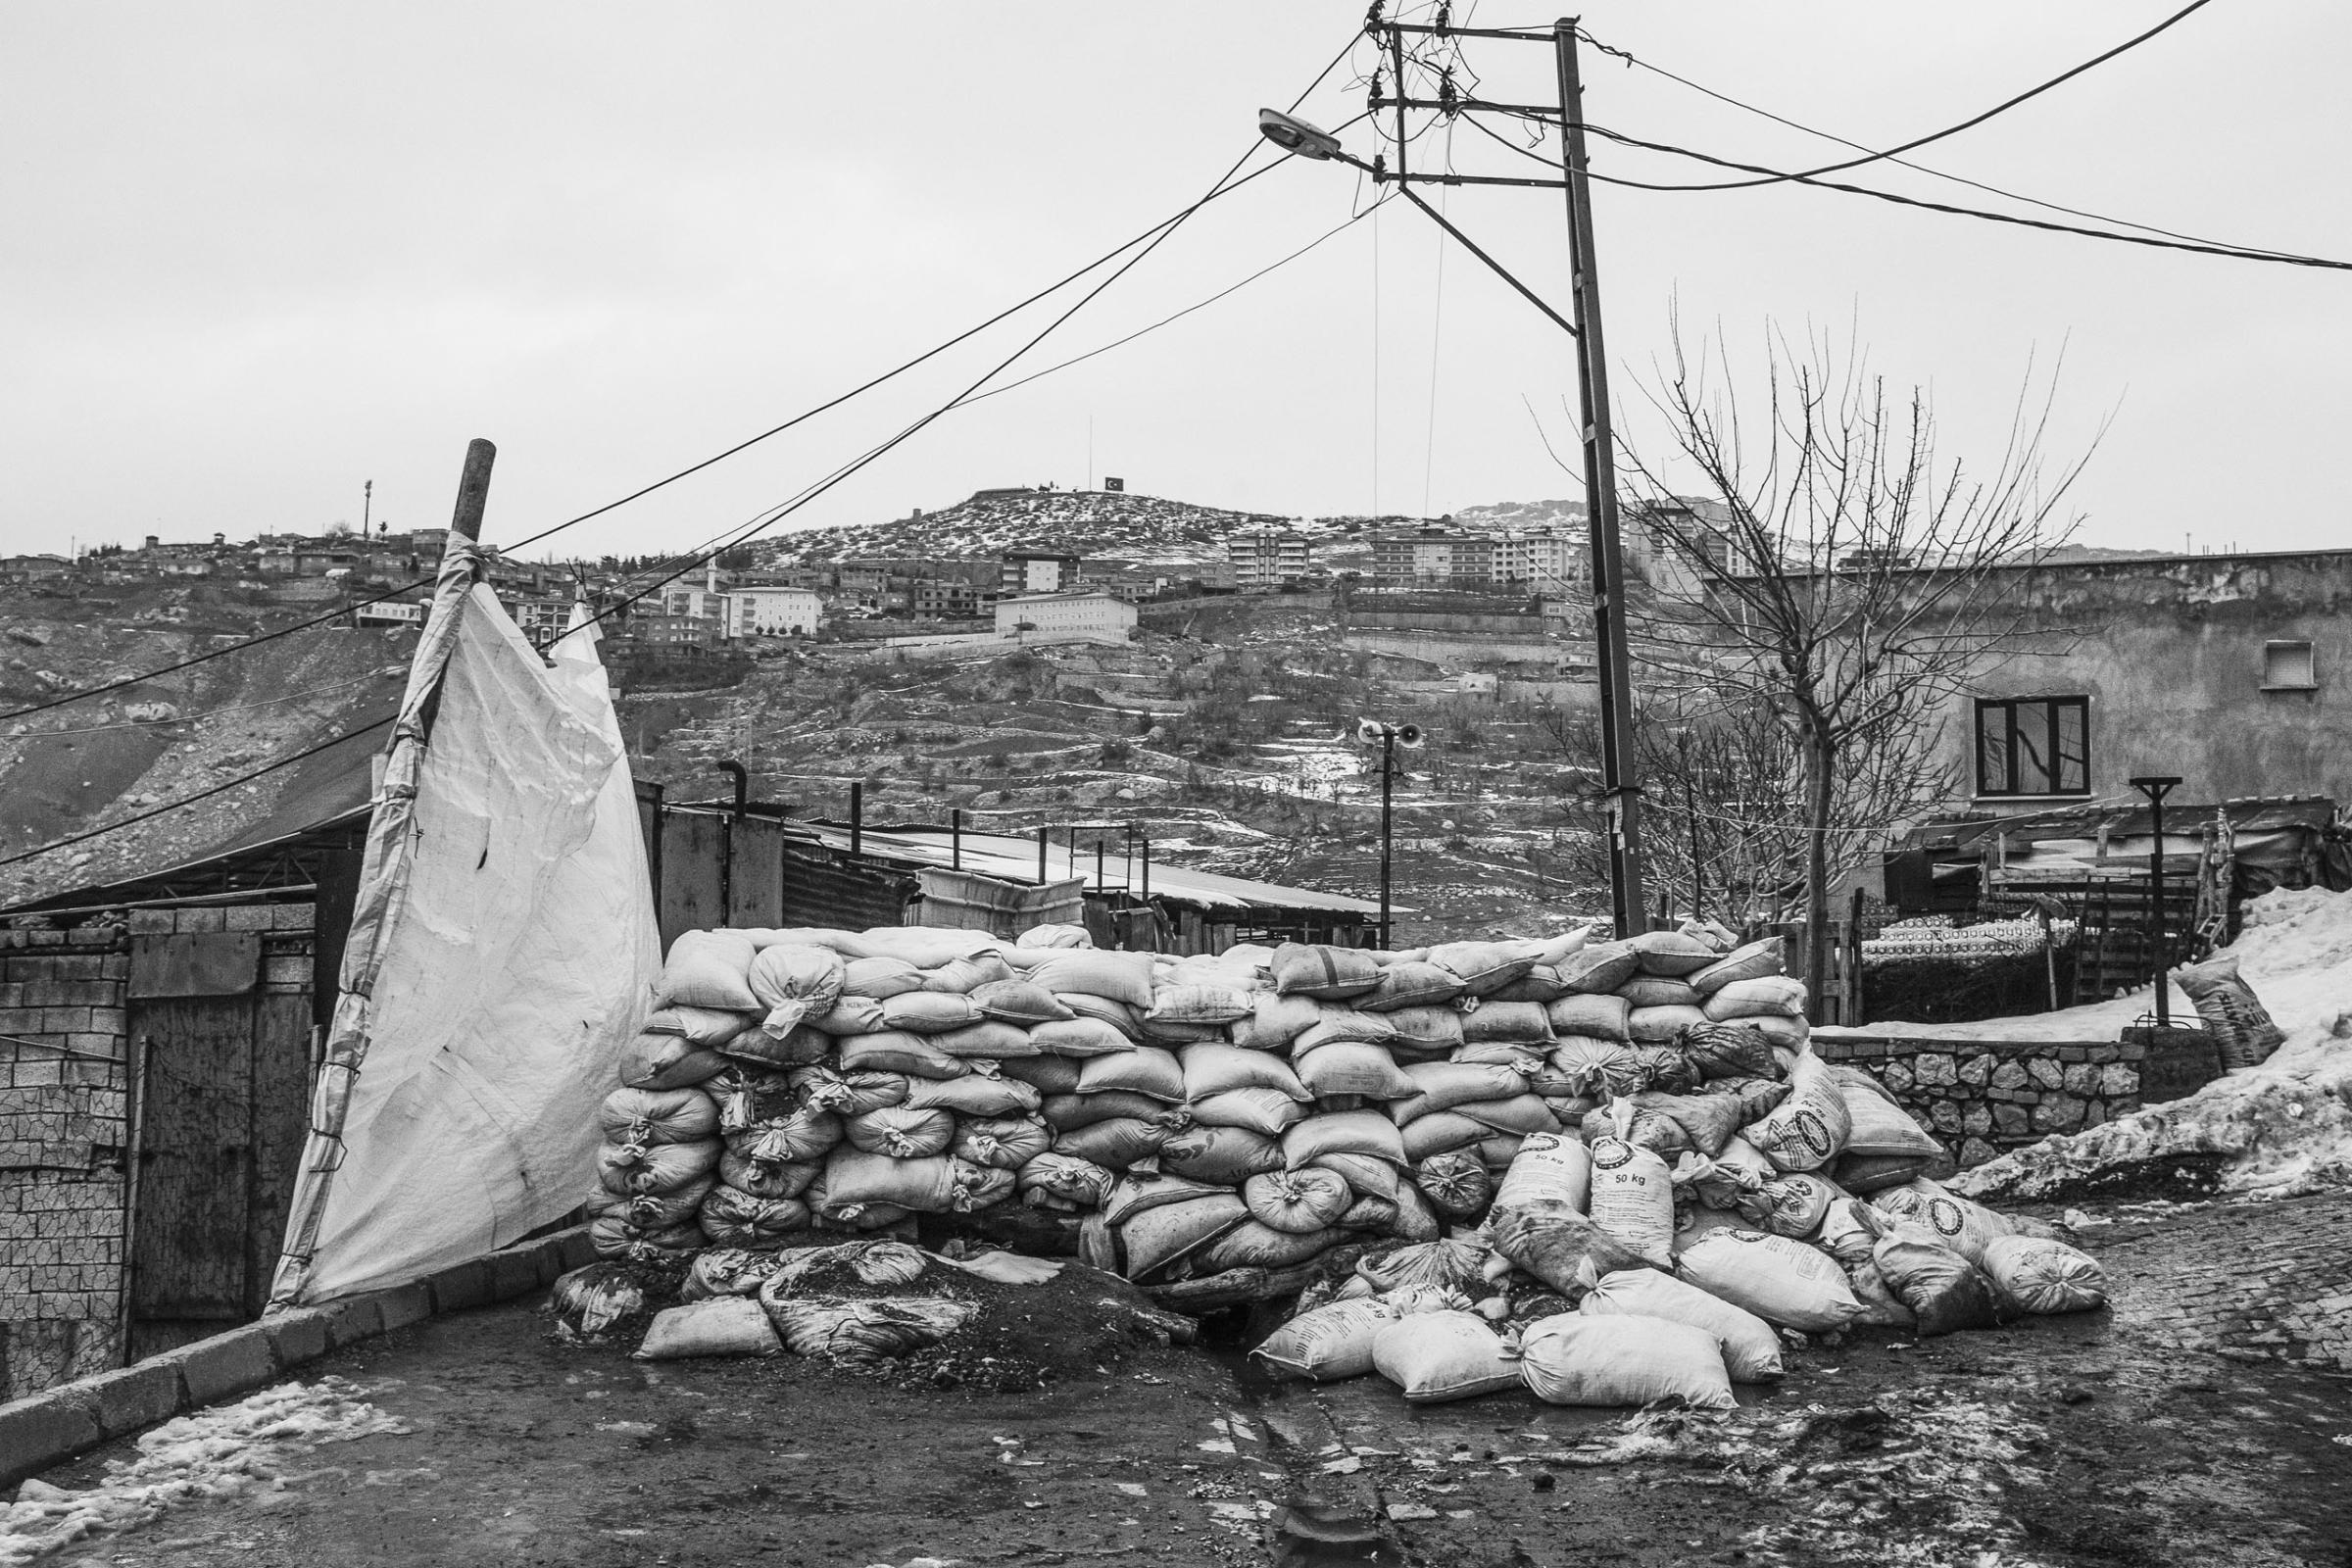 A barricade built by members of the Revolutionary Patriot Youth Movement (YDG-H), Sirnak, Turkey, Jan. 2016.